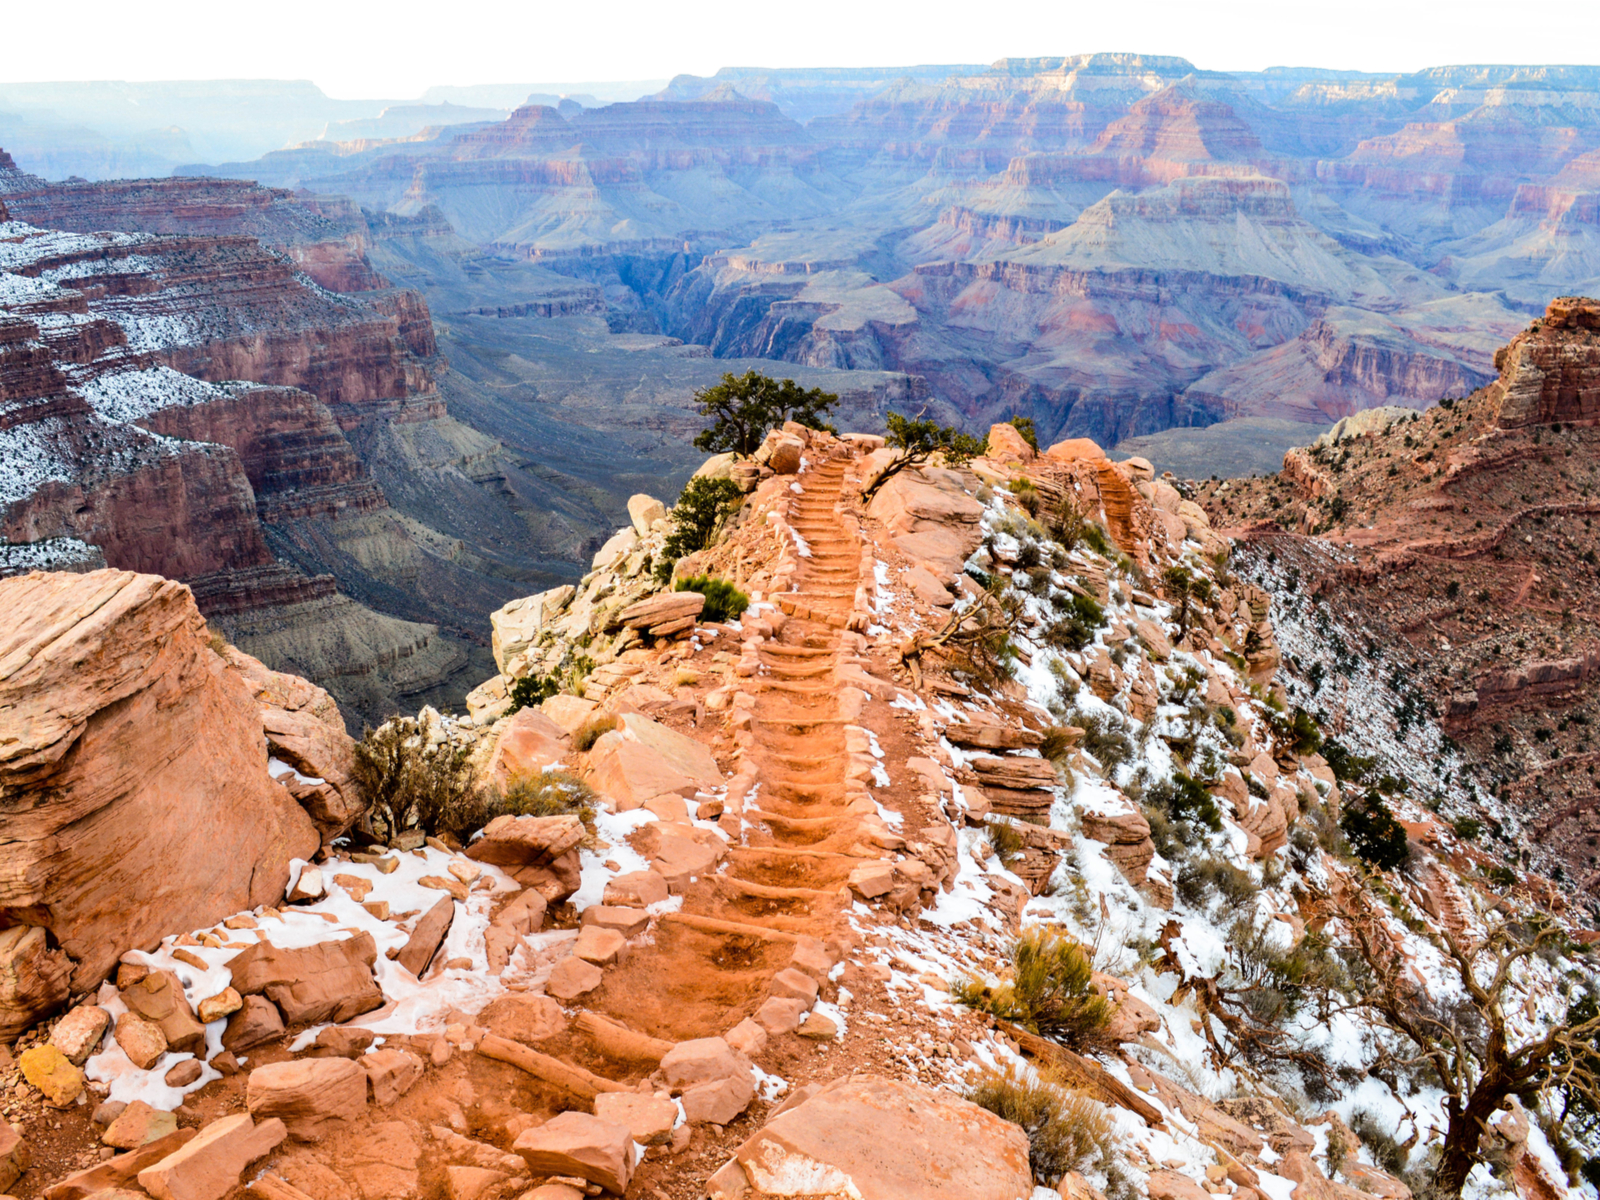 Image of a trail on the south rim in the Grand Canyon, one of the best hikes in the world